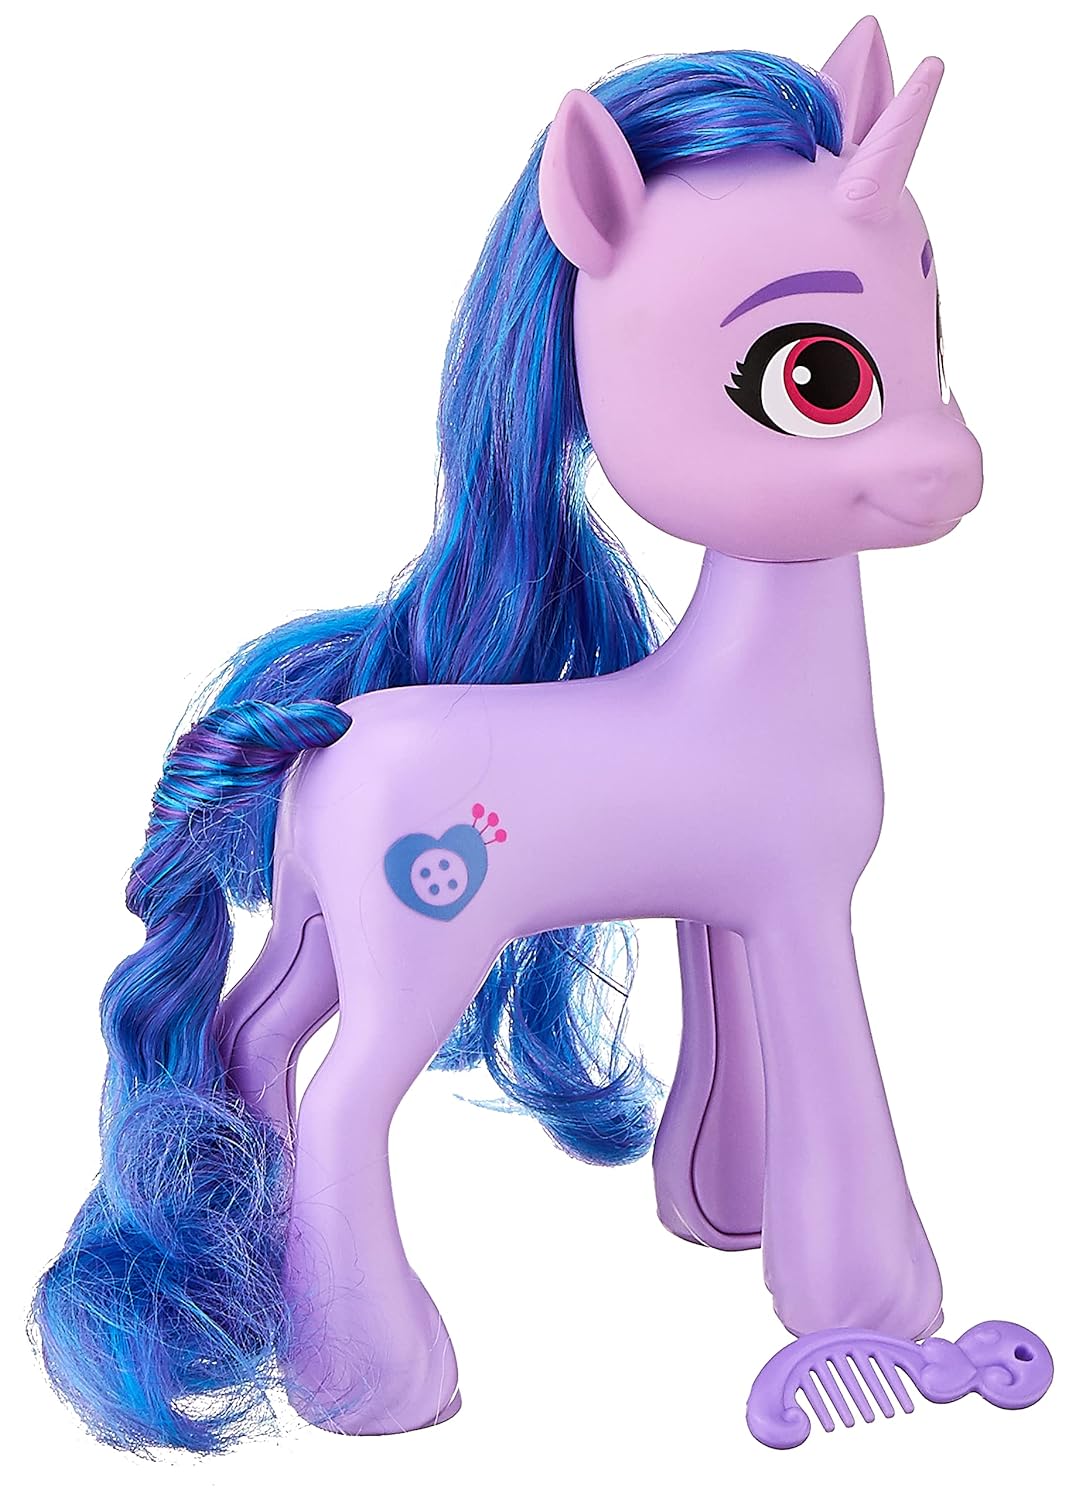 My Little Pony: A New Generation Mega Movie Friends Izzy Moonbow - 8-Inch Purple Pony Figure with Comb, Toy for Kids Ages 3 and Up